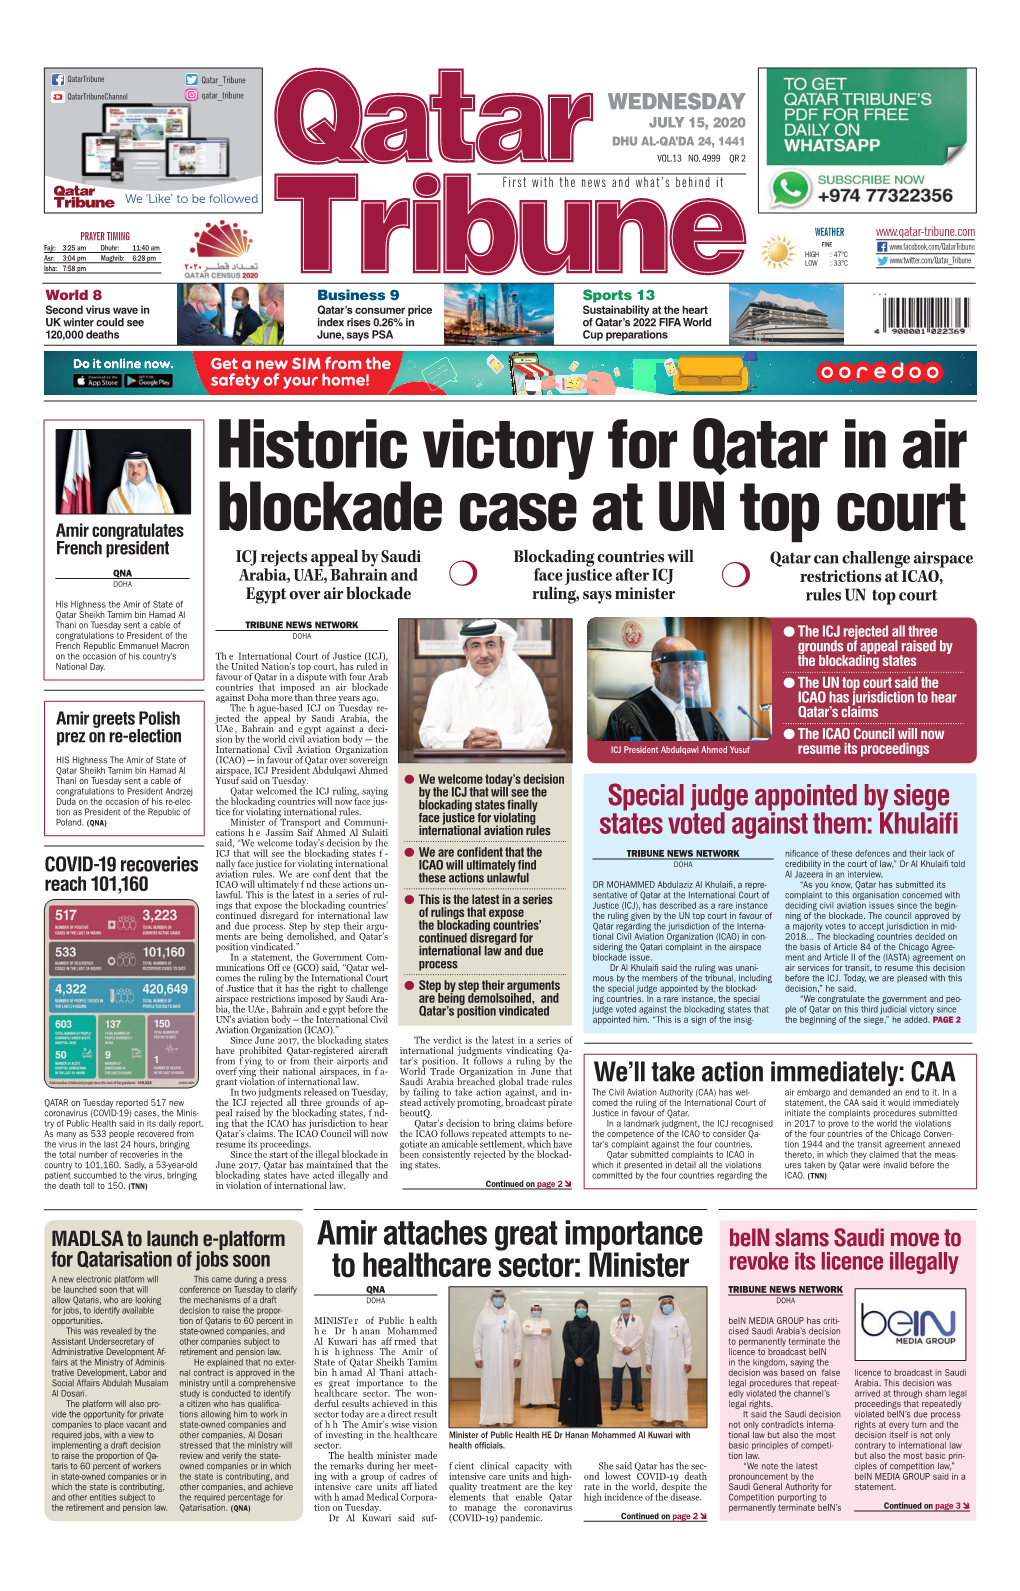 Historic Victory for Qatar in Air Blockade Case at UN Top Court